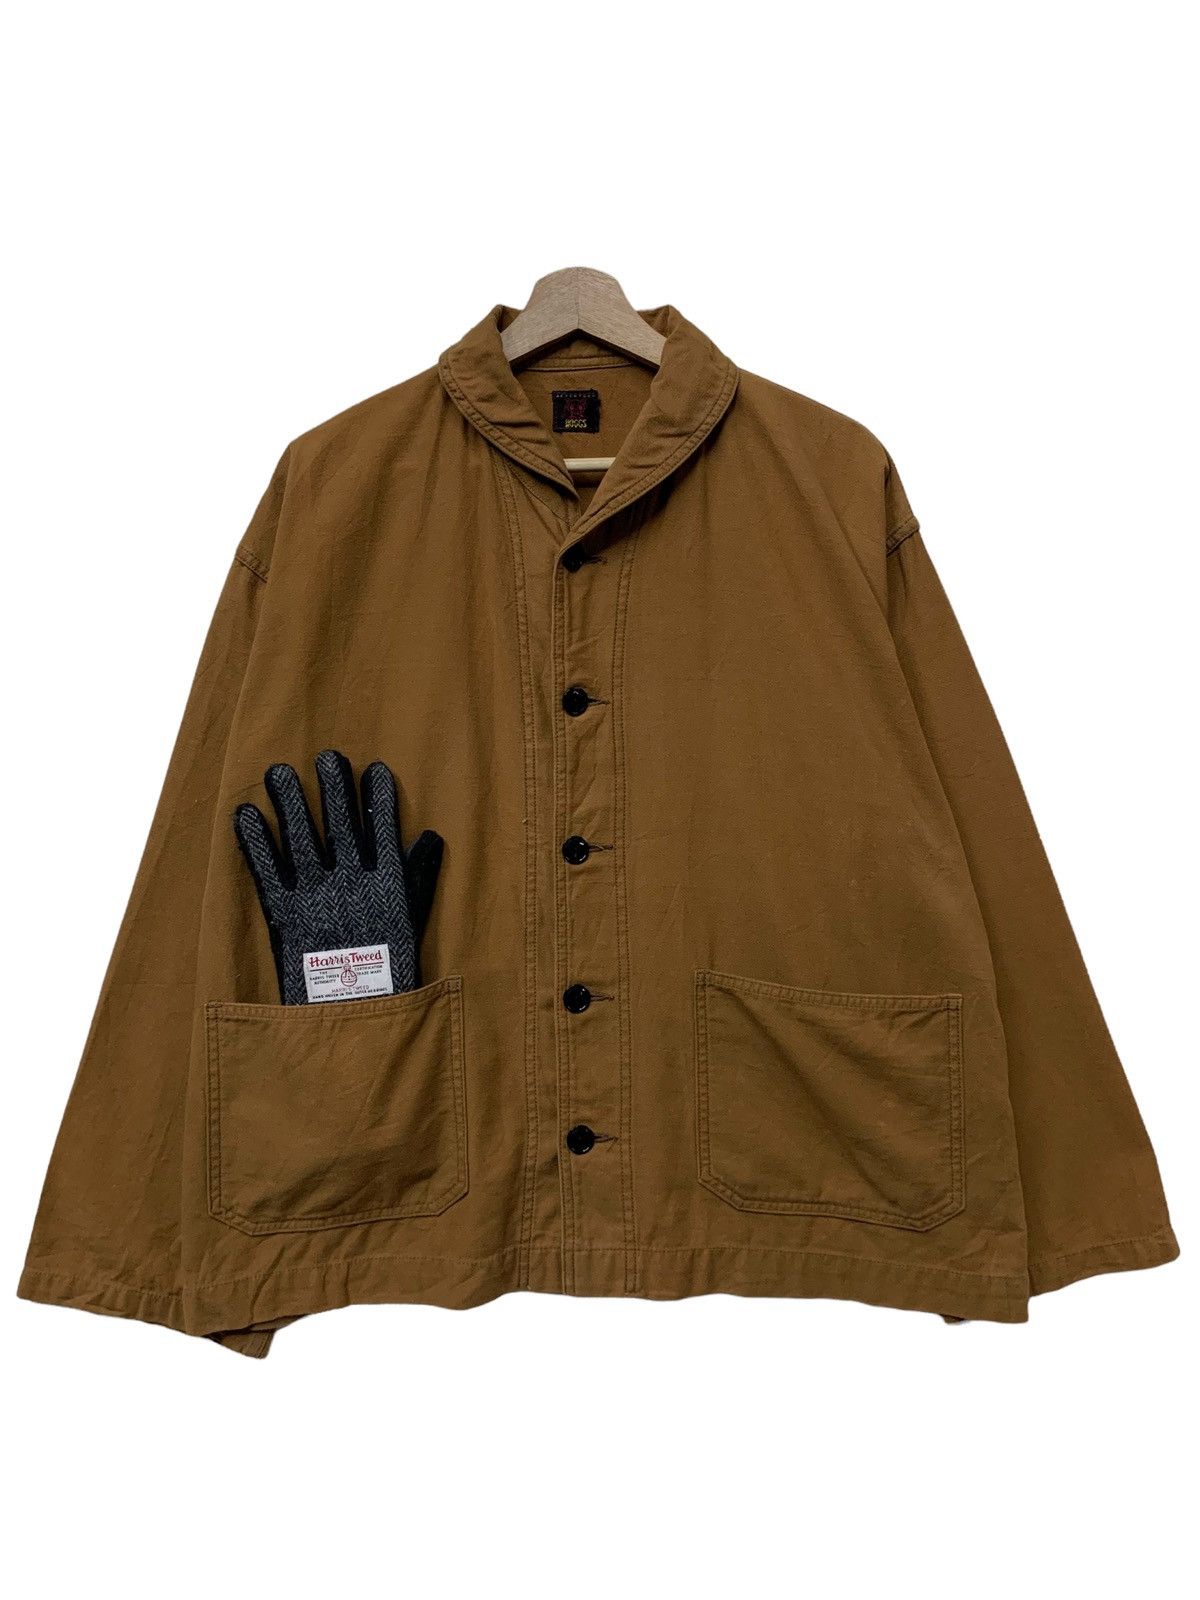 🔥HOGGS NEPENTHES NY SHAWL COLLAR WORKERS JACKET - 1